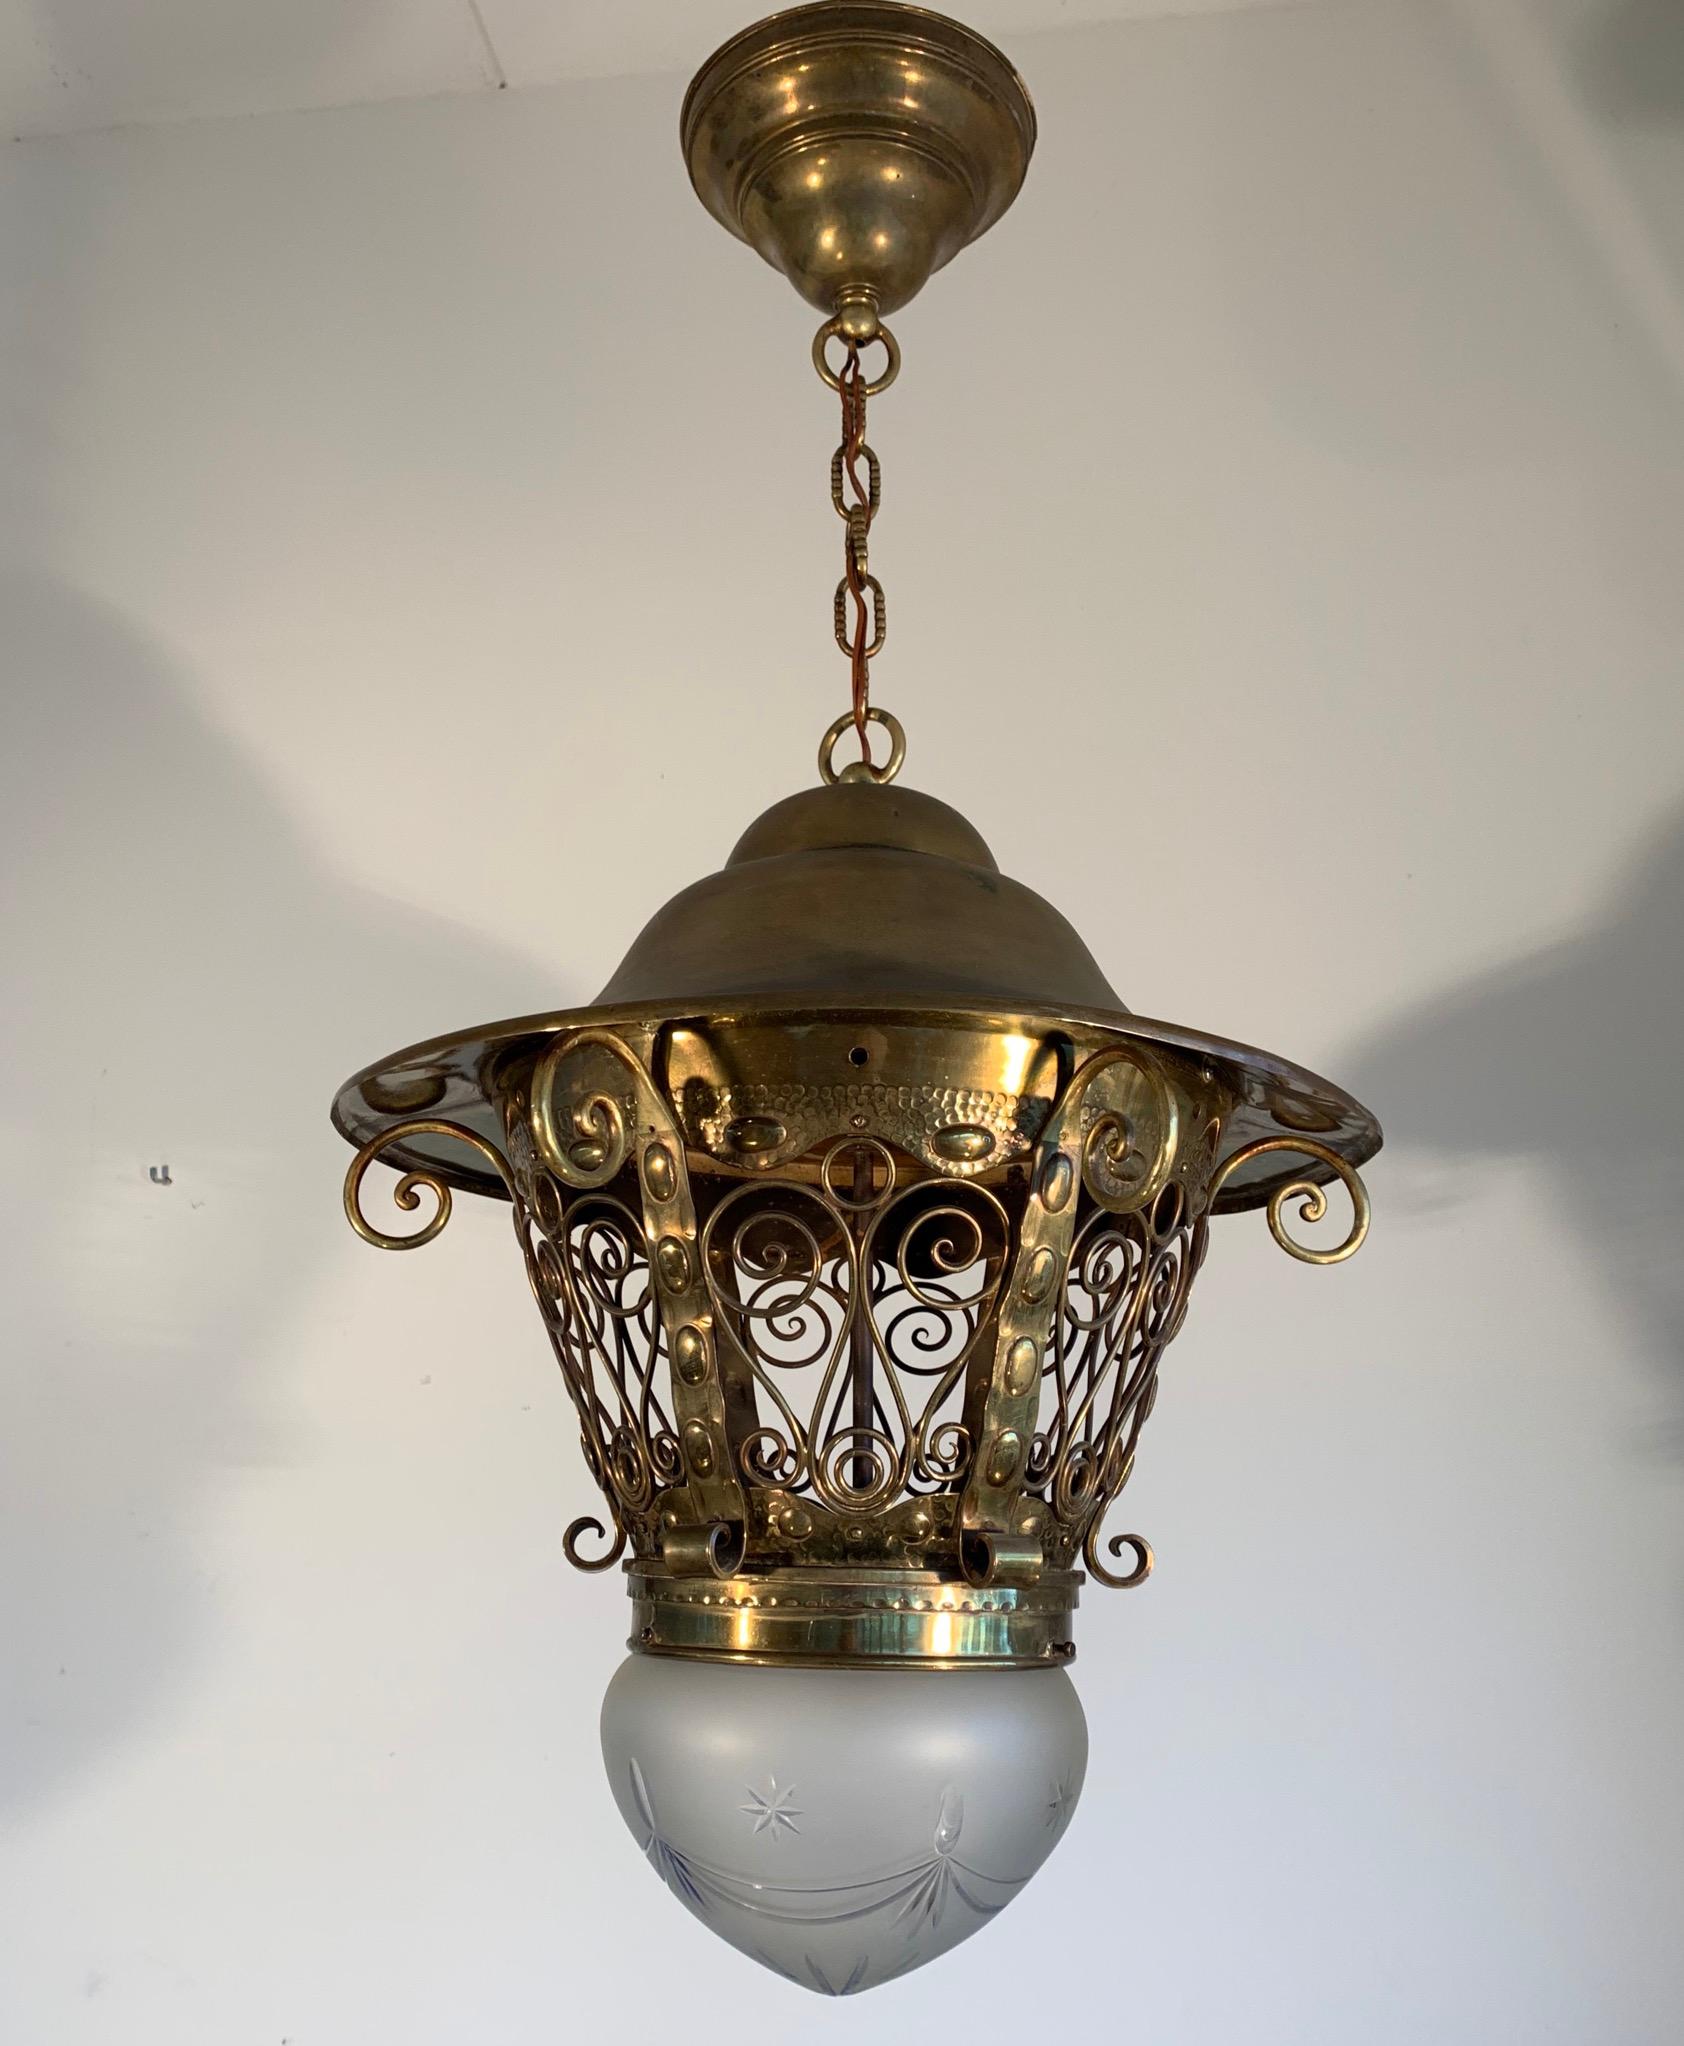 Wonderful and all handcrafted Arts and Crafts pendant. 

If you live in an early 1900s Arts & Crafts home or if you are a collector of unique and stylish home accessories of that period then this handcrafted light fixture could be perfect for you.